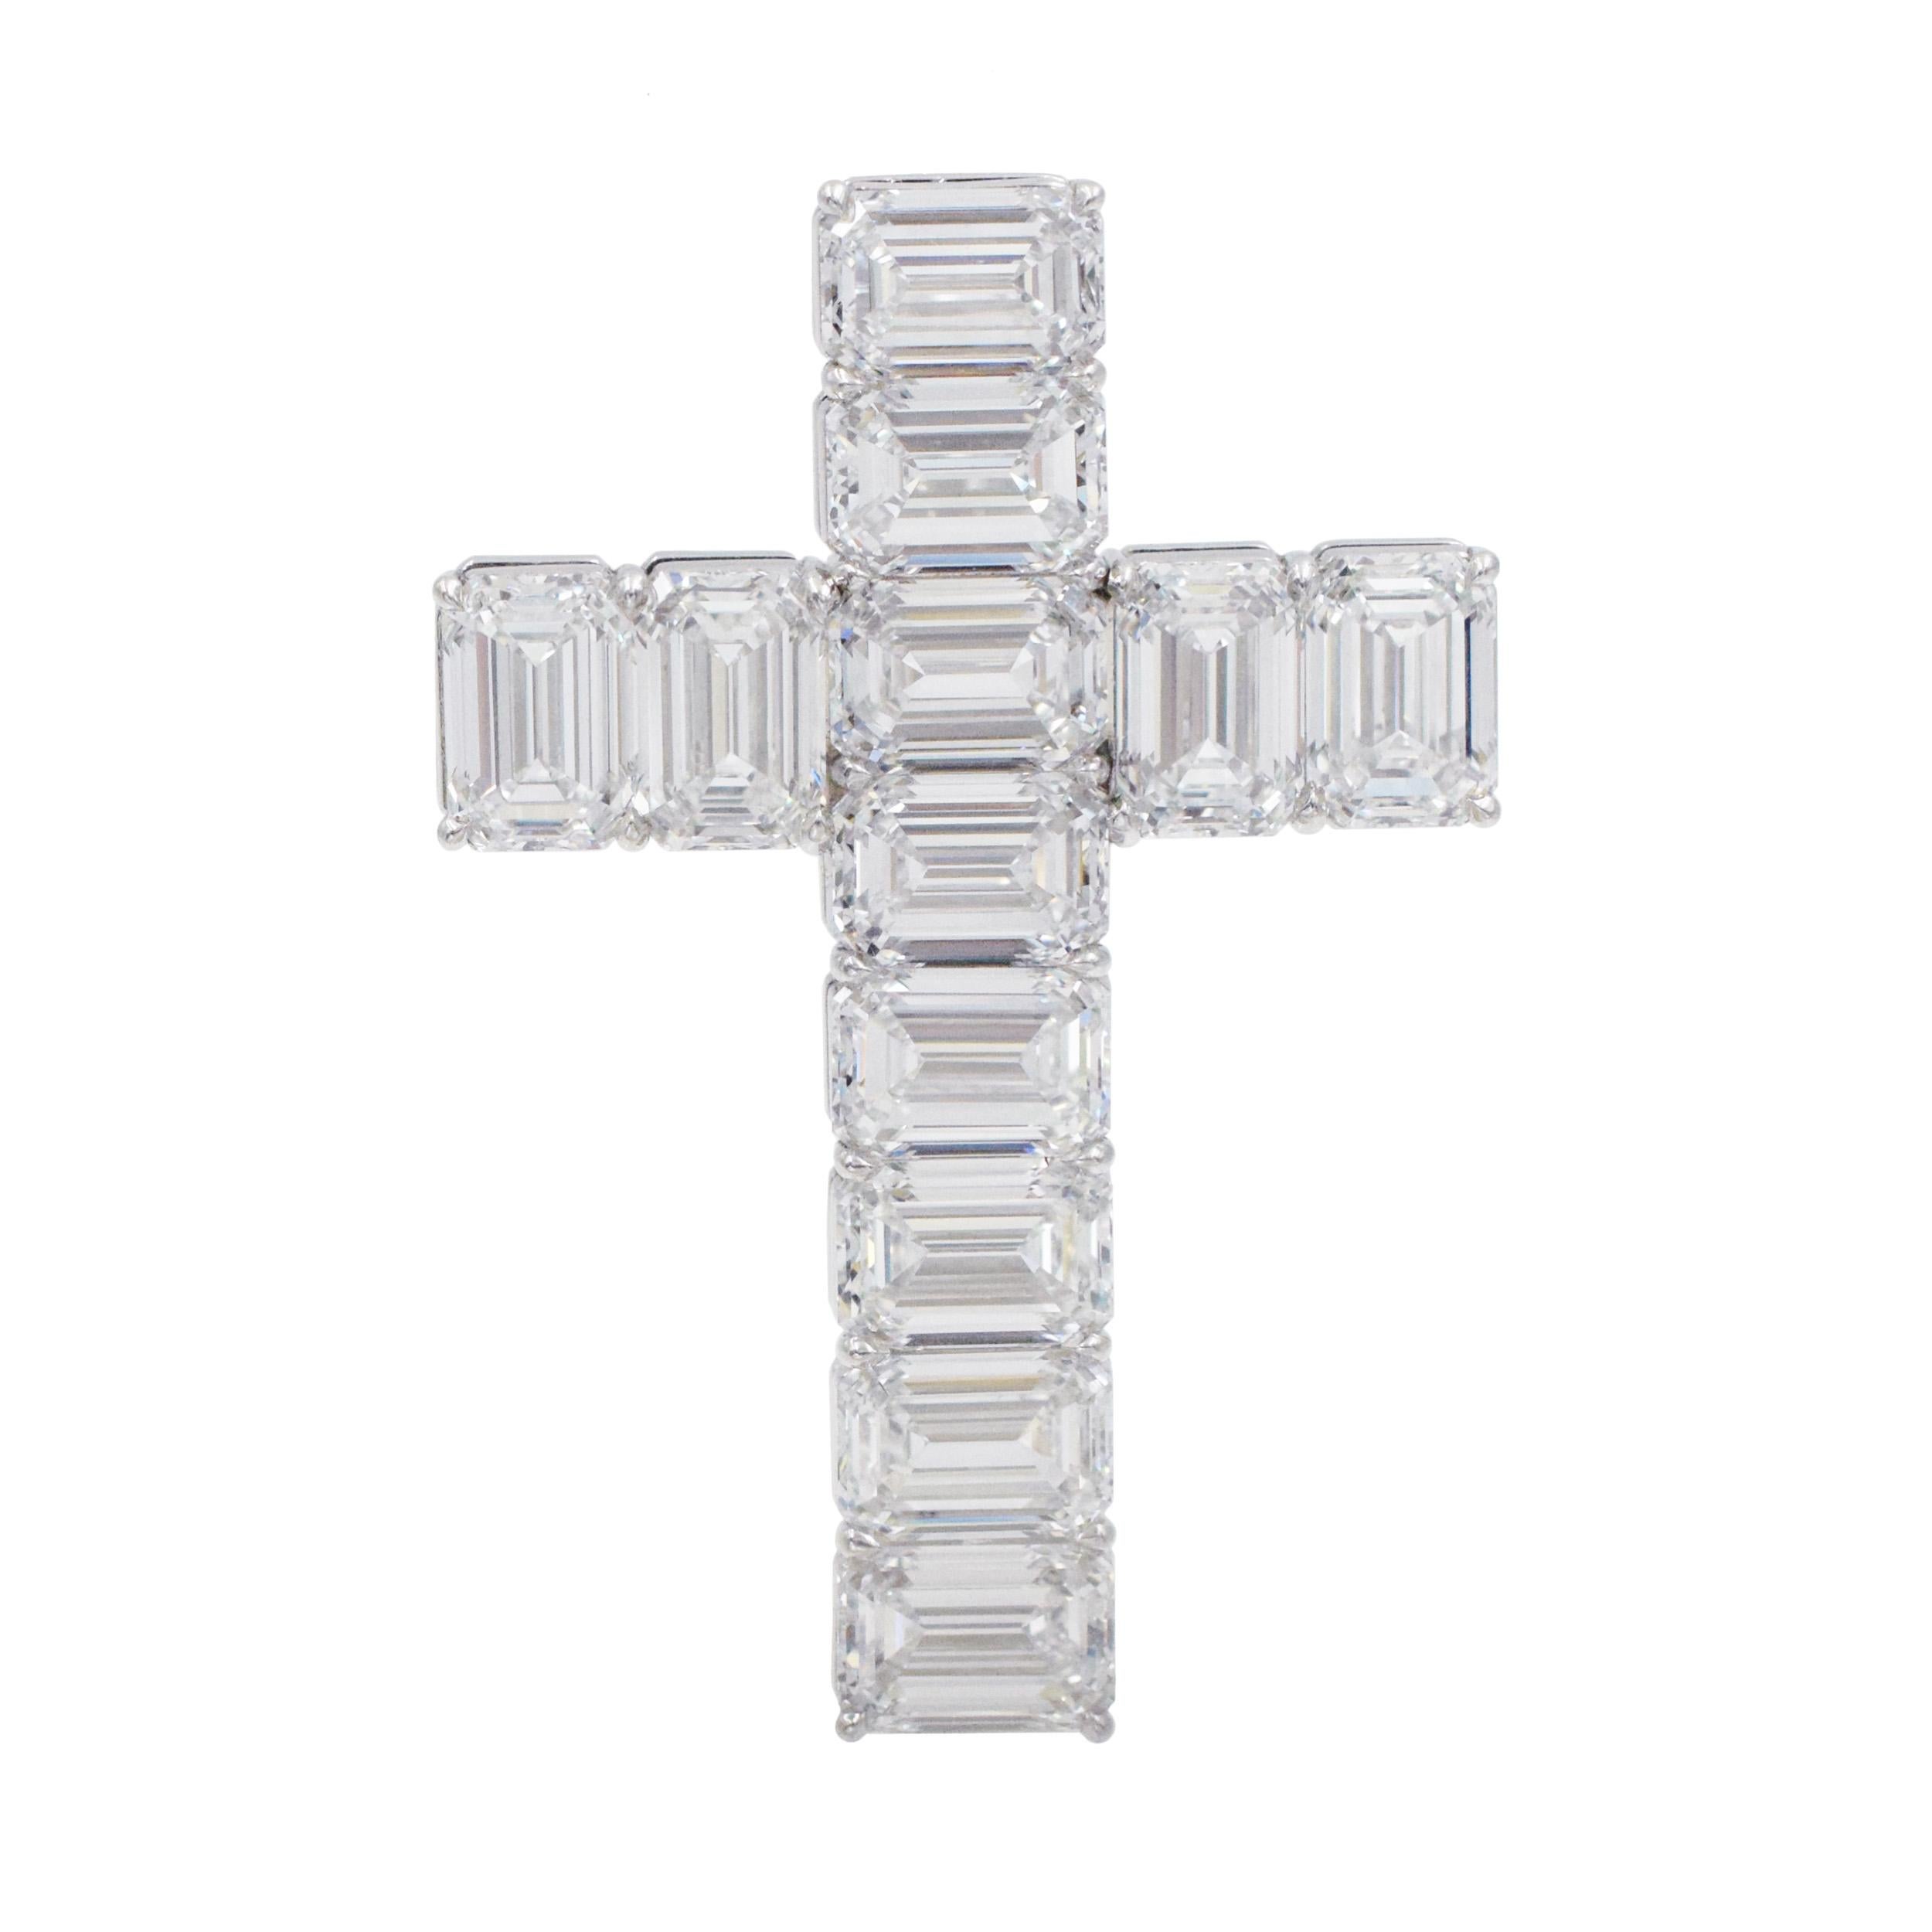 GIA certified Diamond and Platinum Cross Pendant This cross has 12 emerald cut diamonds with total weight of 10.89 carats (Color: D-F, Clarity VVS1-VS2, All GIA Certified) all set in platinum, with a bail on the back. One a black code necklace